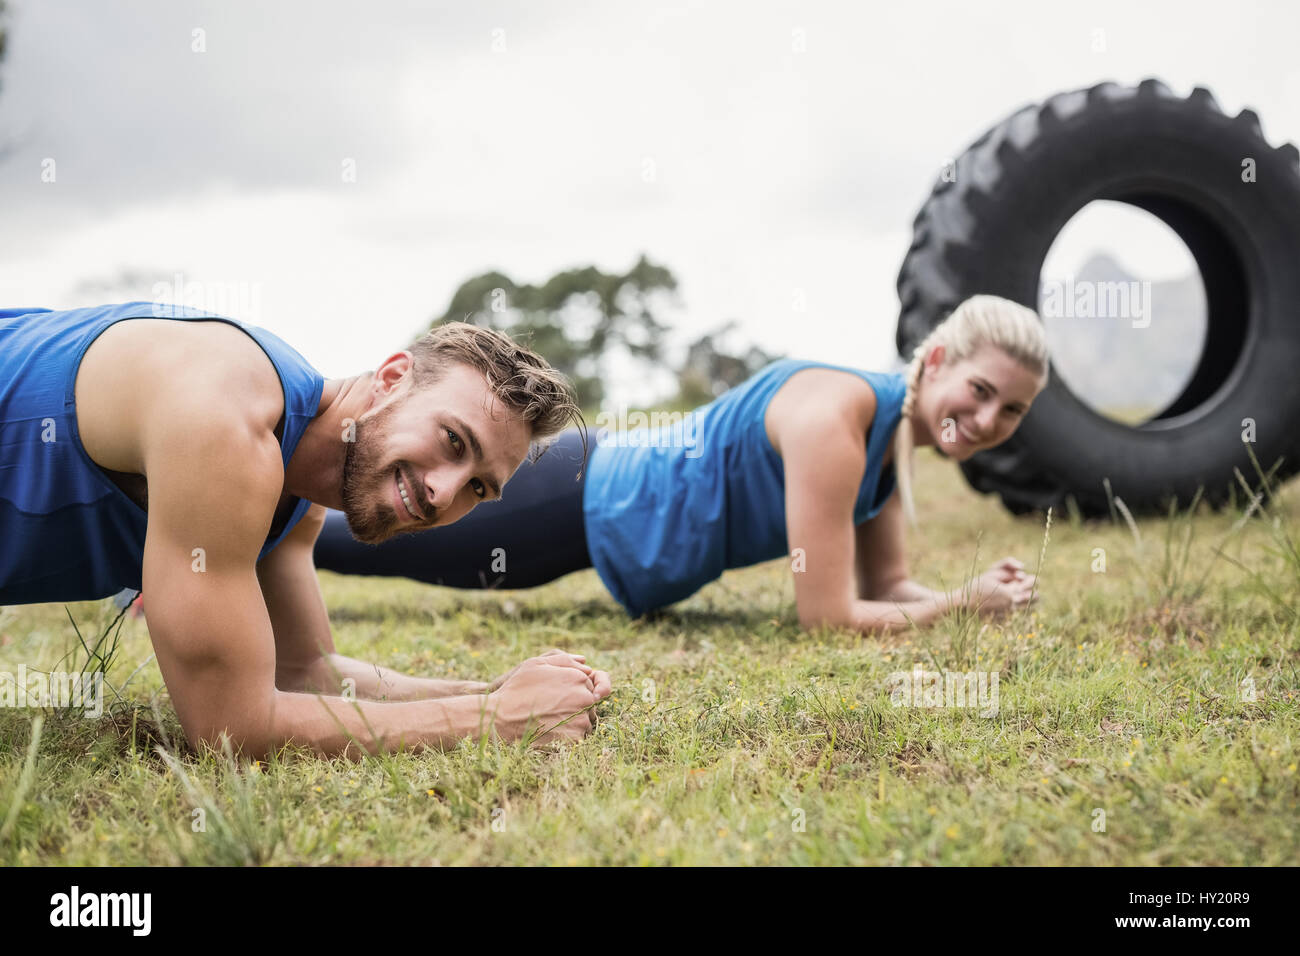 Fit people performing pushup exercise in boot camp Stock Photo